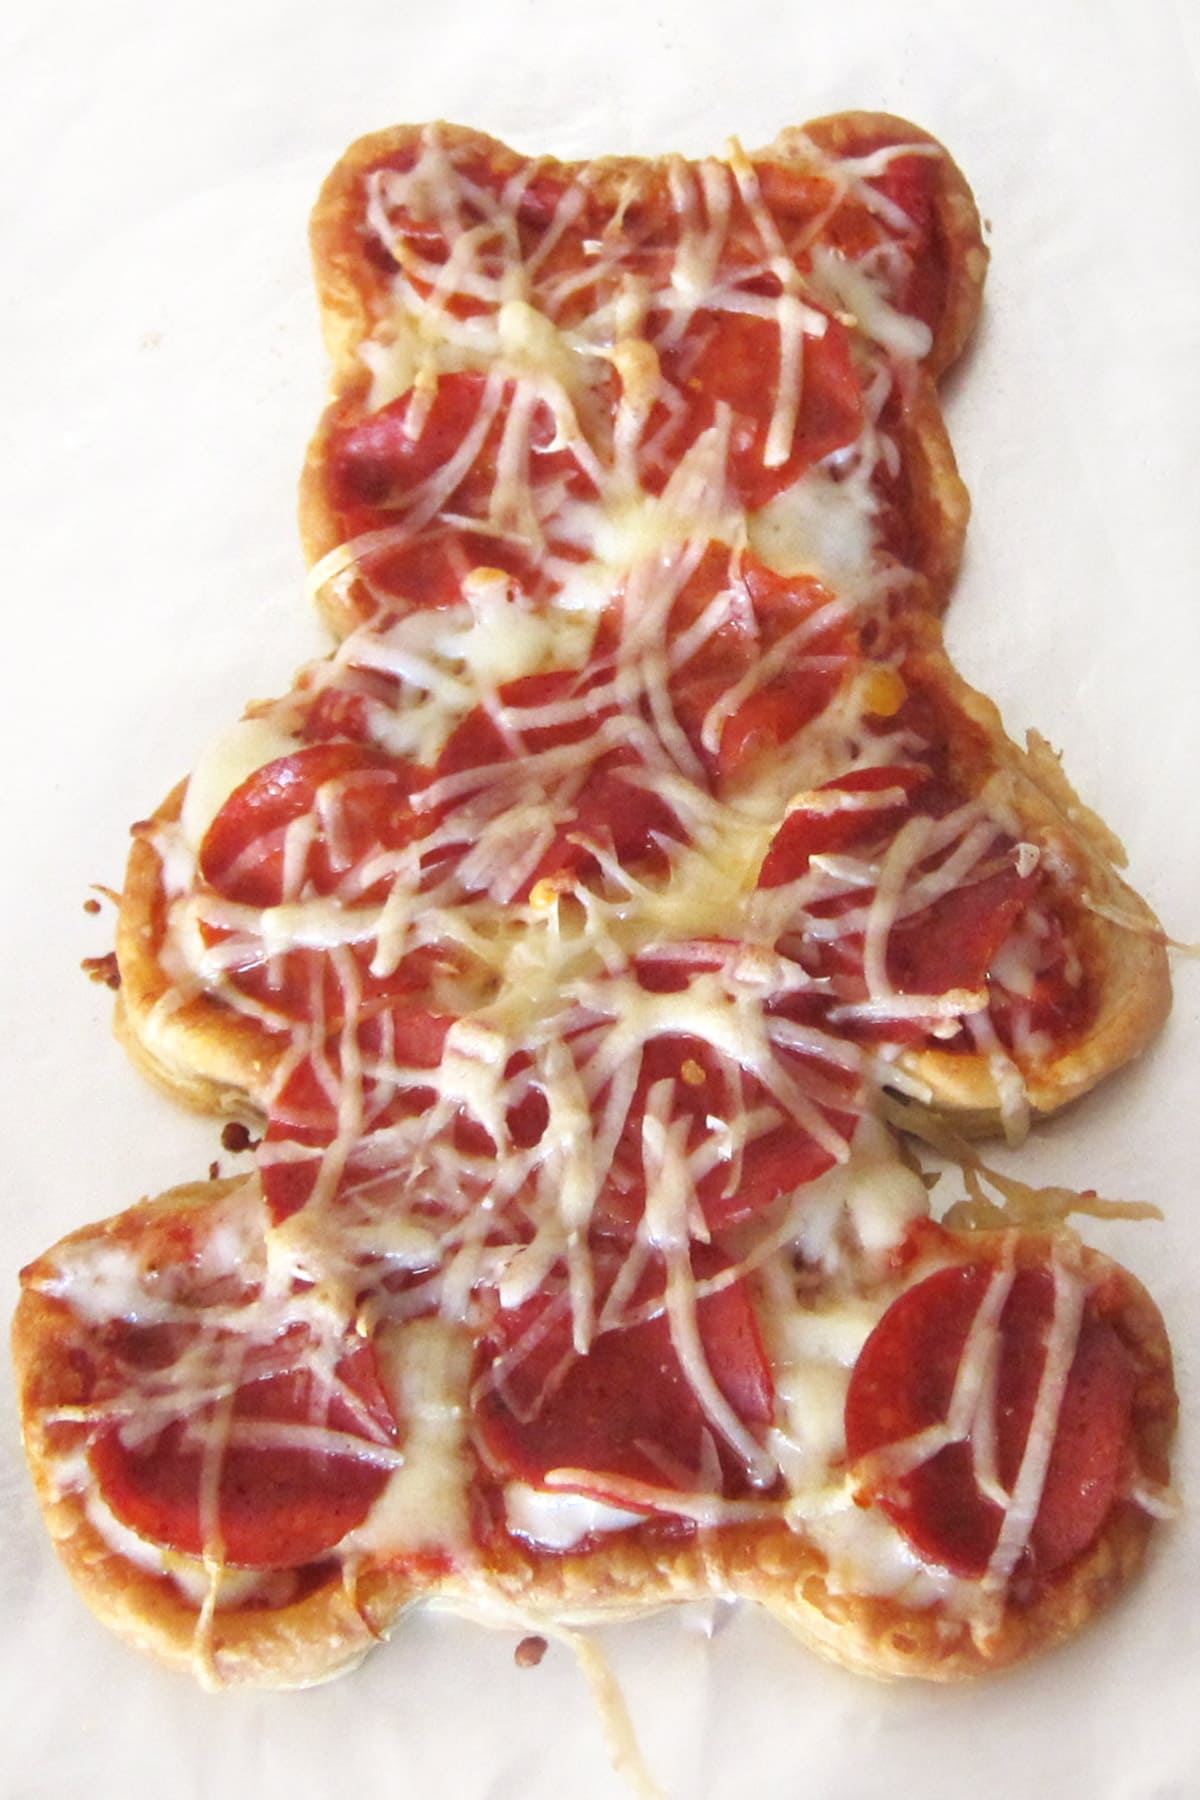 teddy bear pizza topped with pizza sauce, pepperoni, and mozzarella cheese